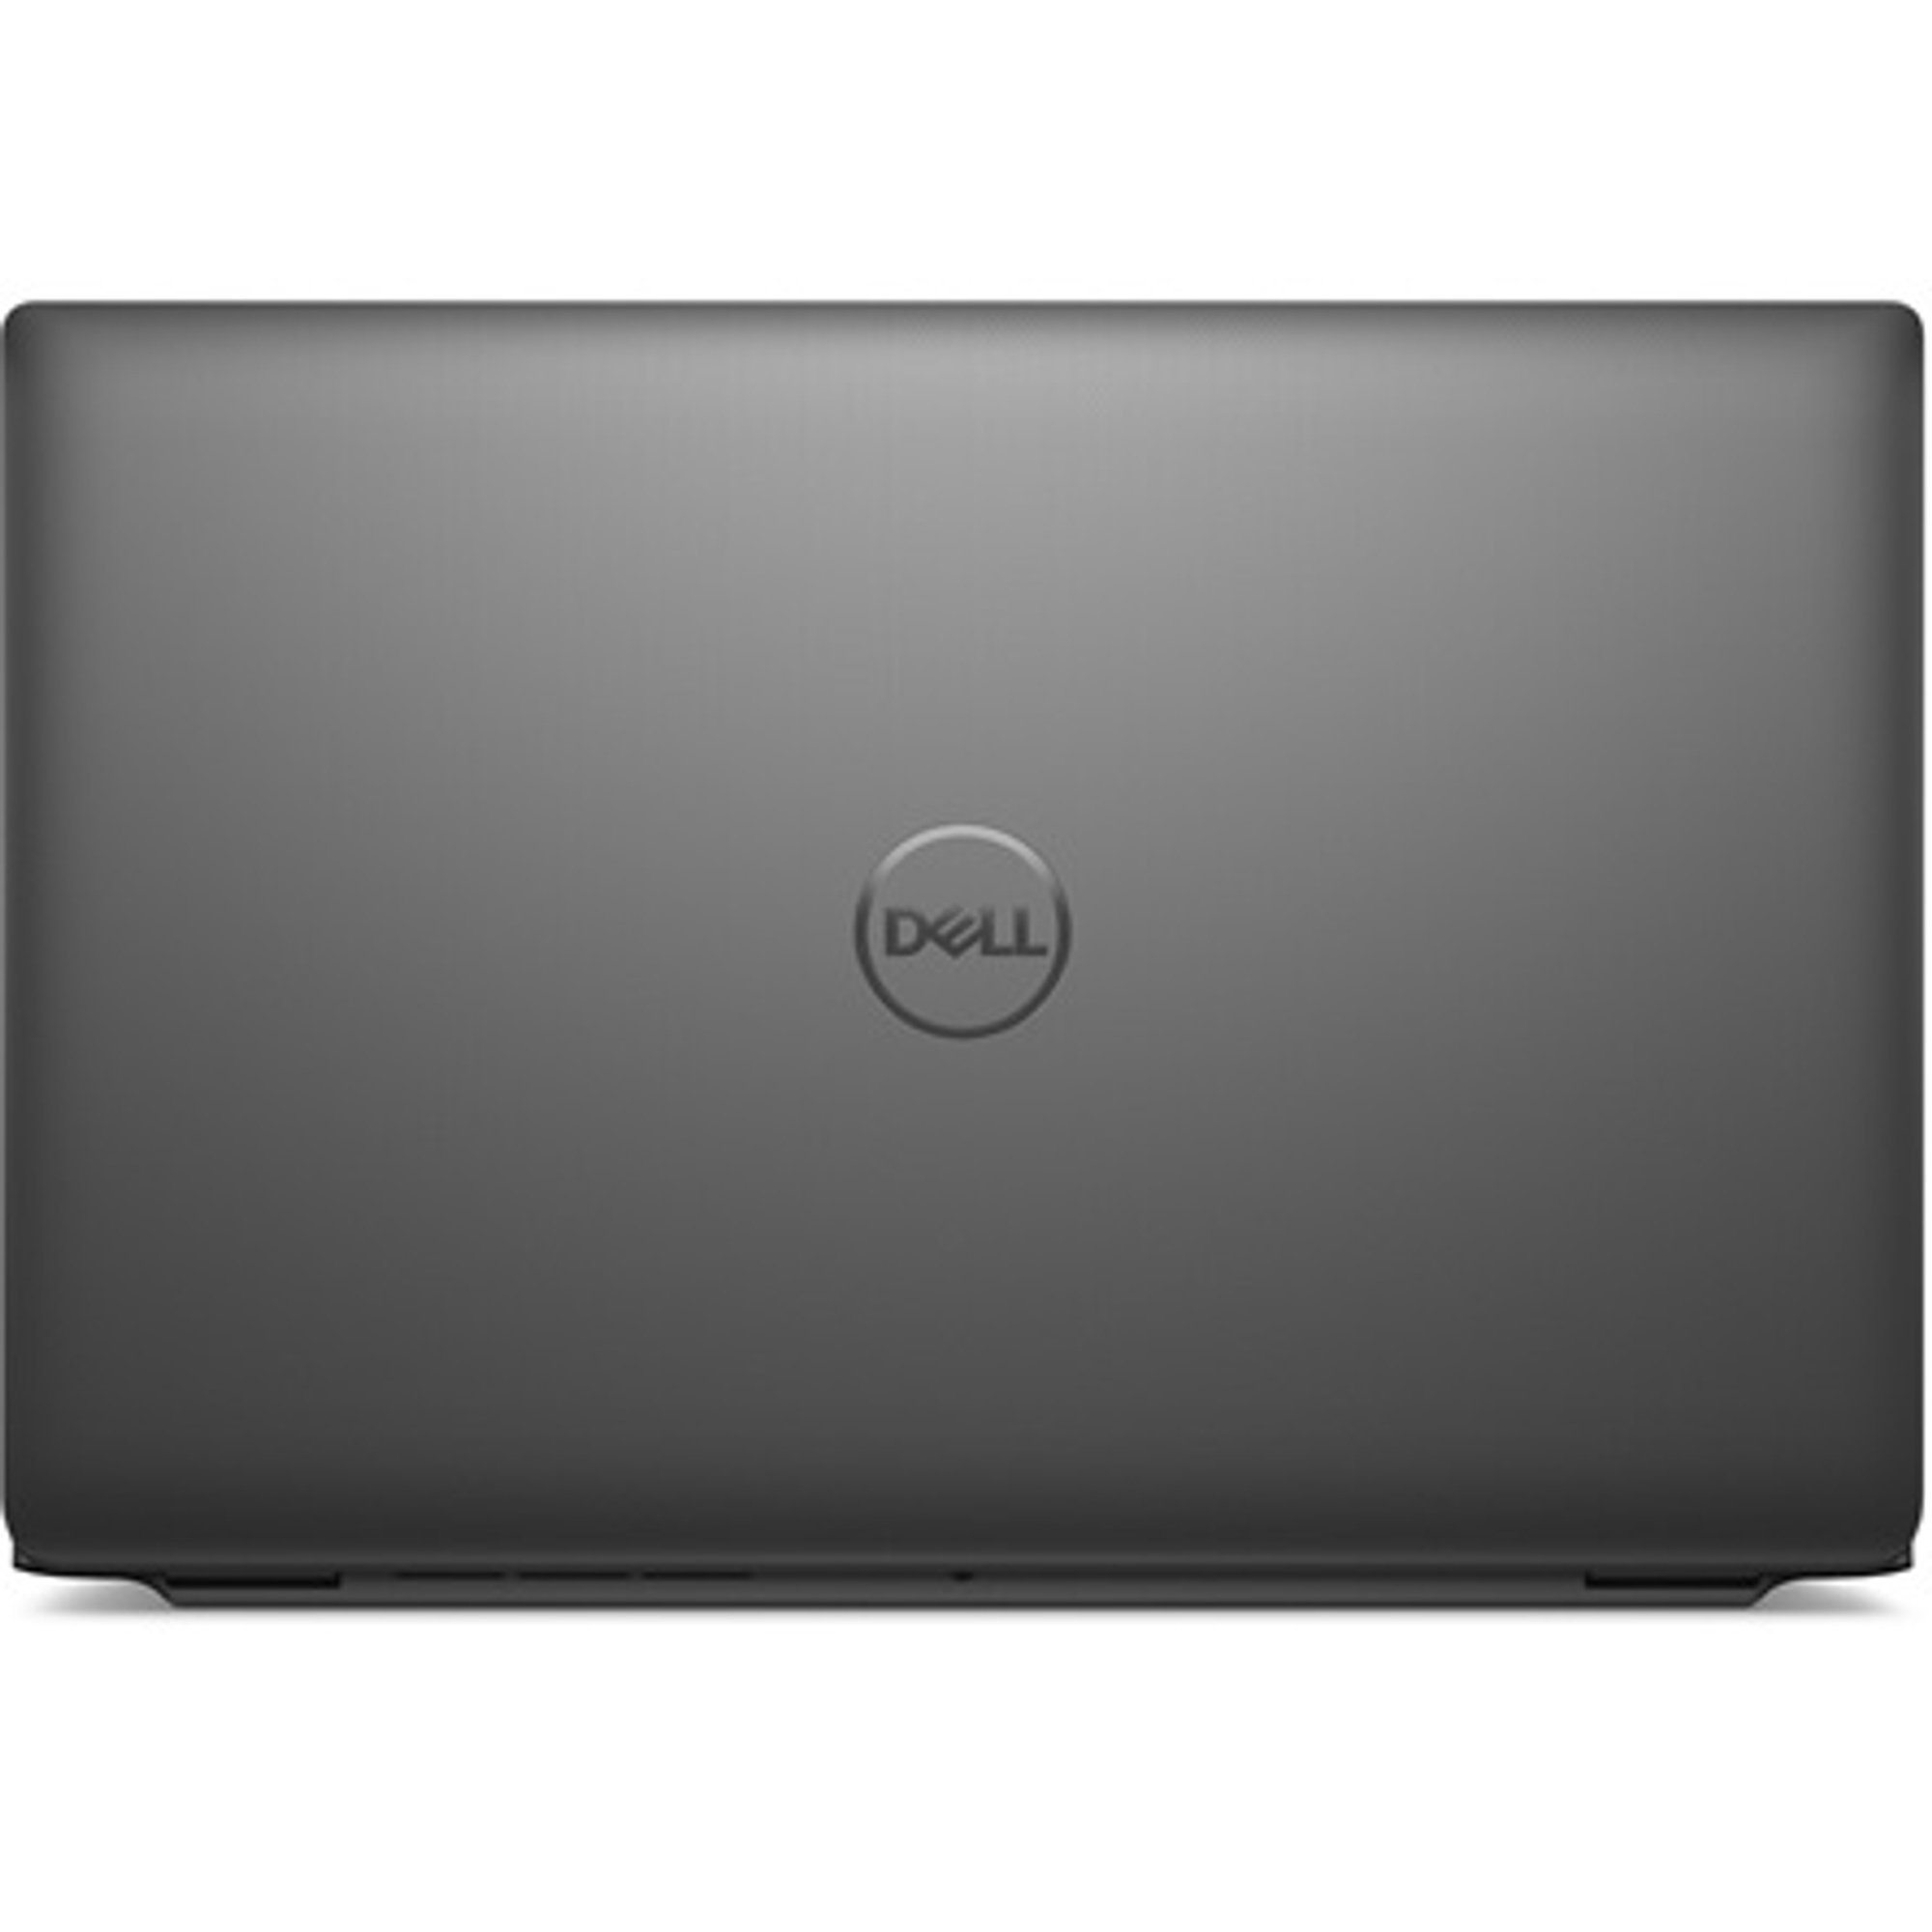 DELL L3540-17 Laptop / Notebook 7